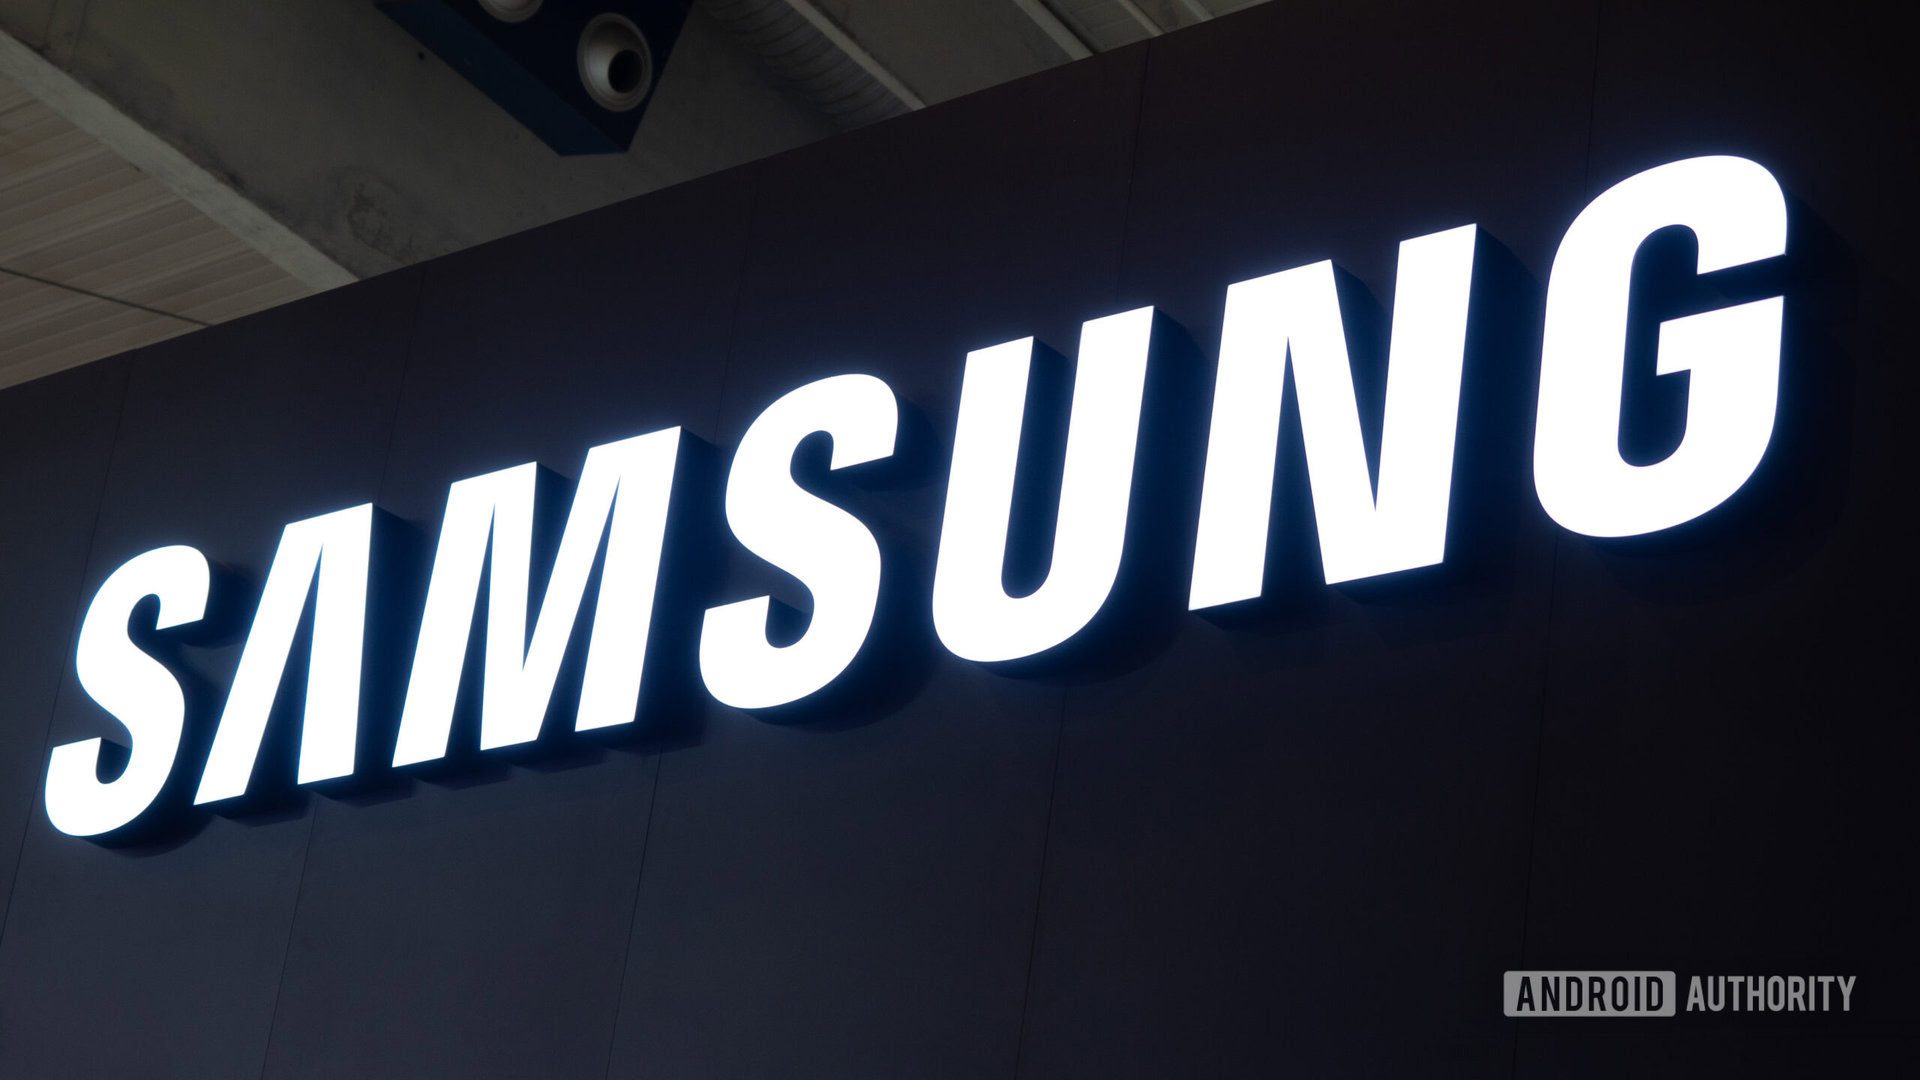 Samsung Unpacked leak may have ruined everything planned for the event